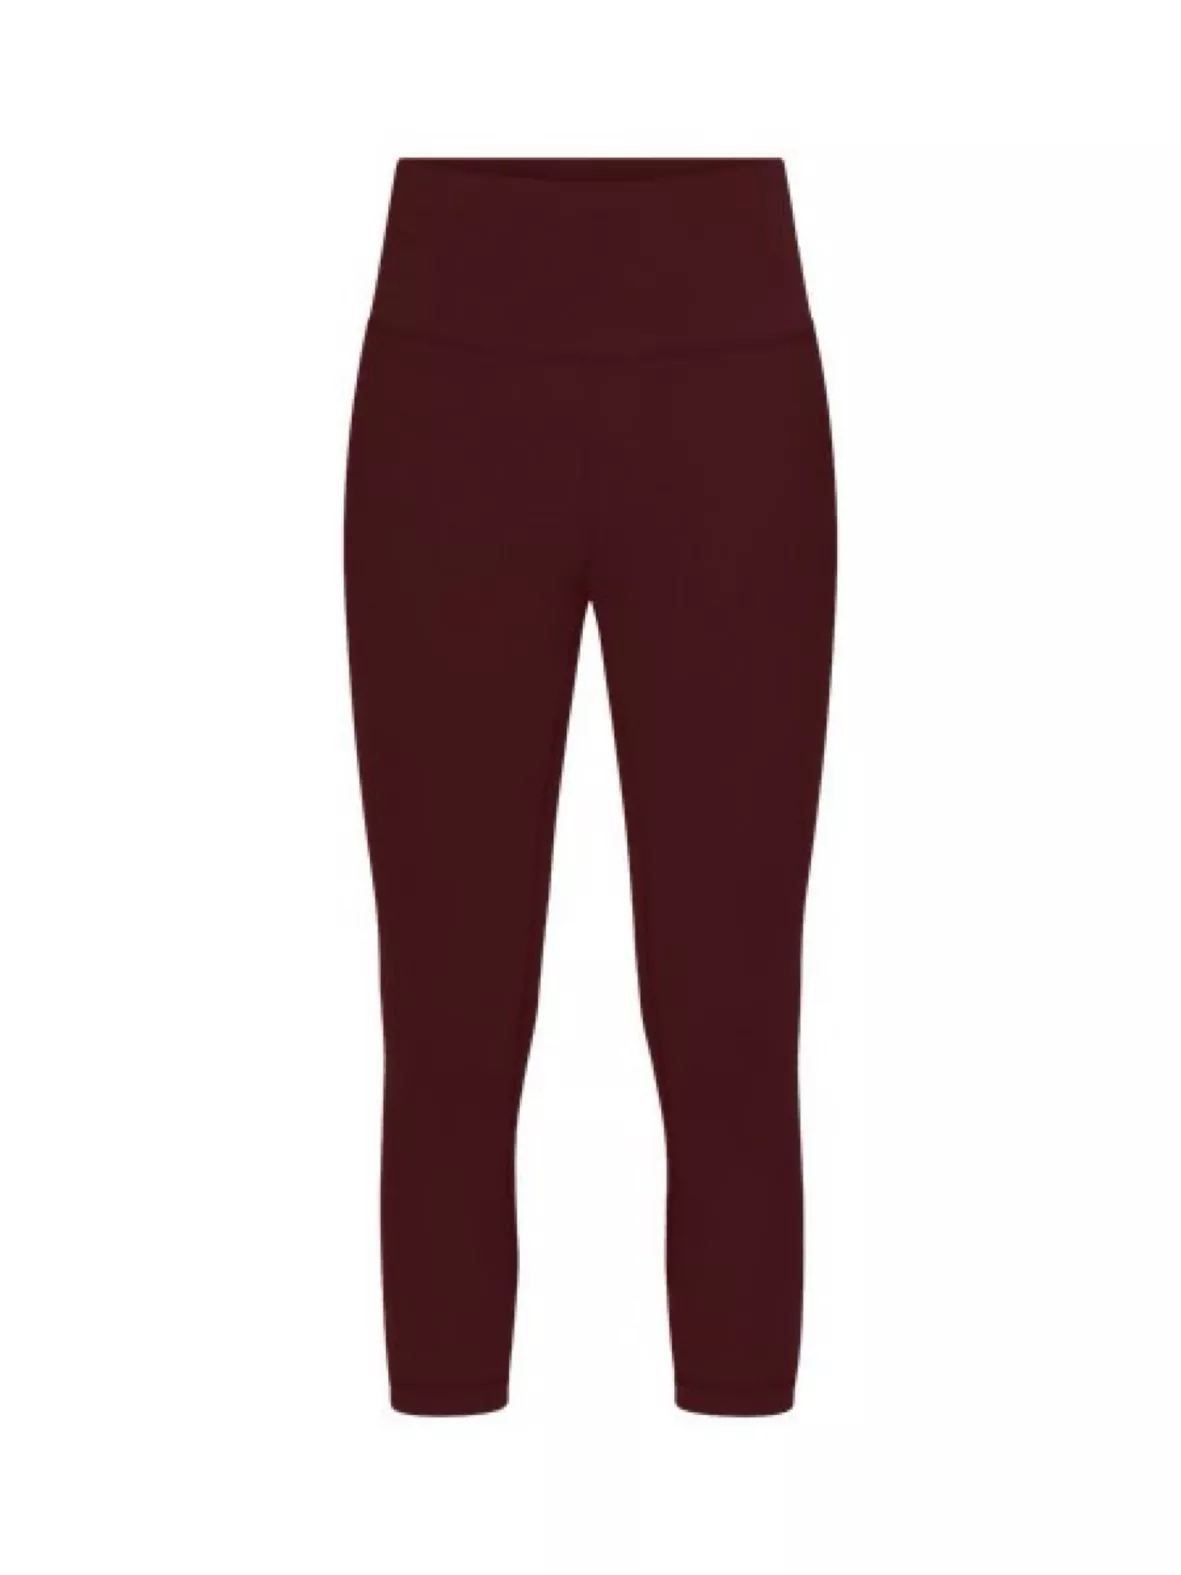 Track lululemon Align™ High-Rise Pant with Pockets 25 - Red Merlot 